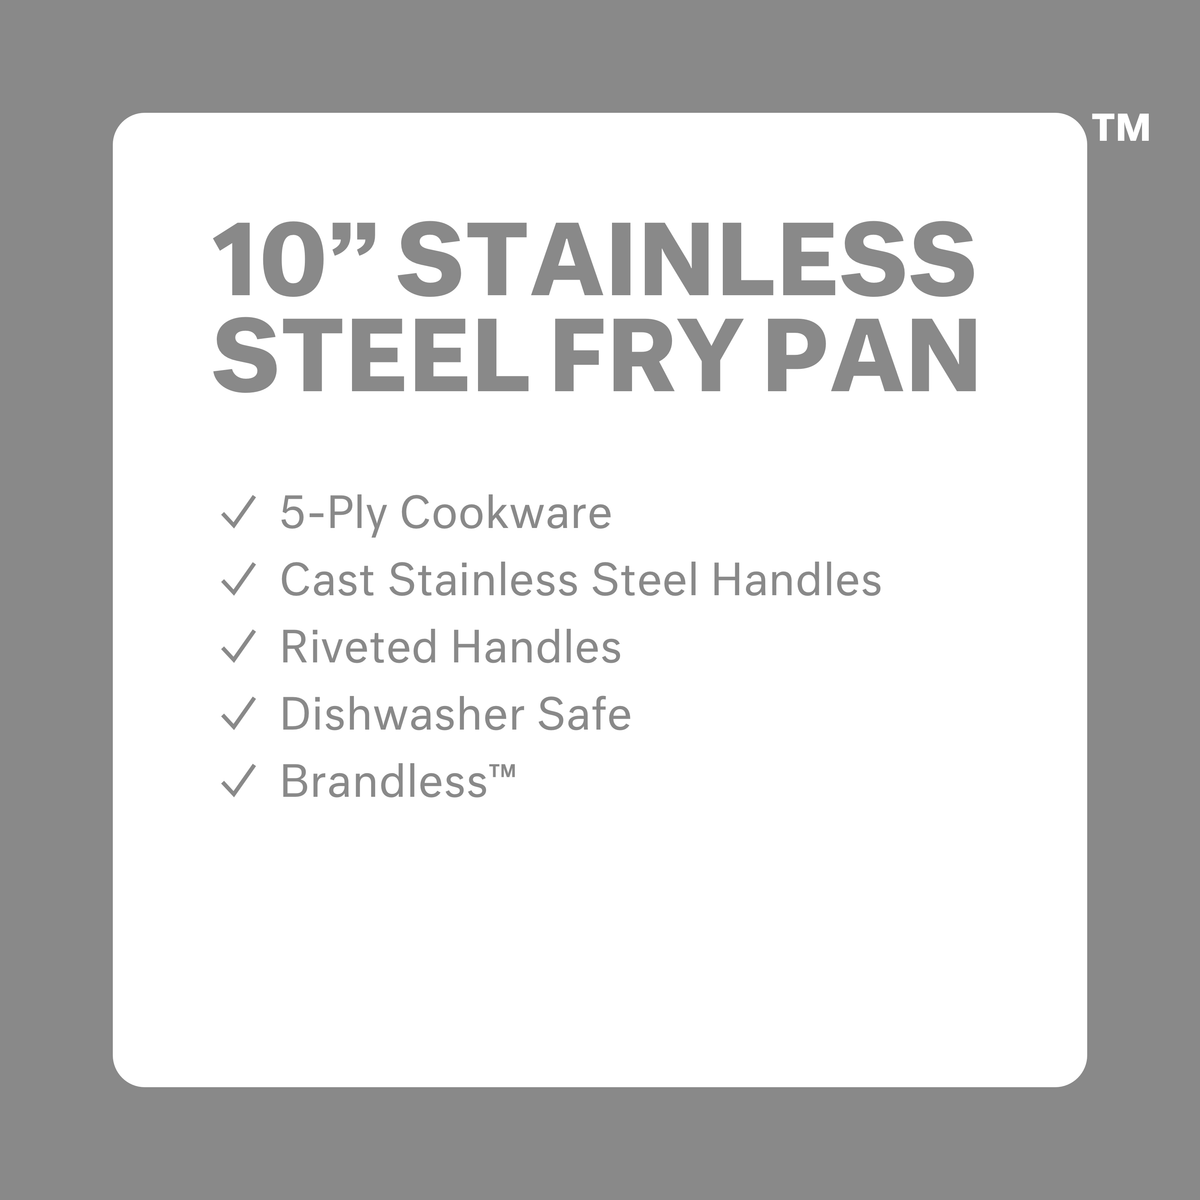 10 inch stainless steel fry pan.  5-ply cookware.  Cast stainless steel handles.  Riveted Handles.  Dishwasher safe.  Brandless.